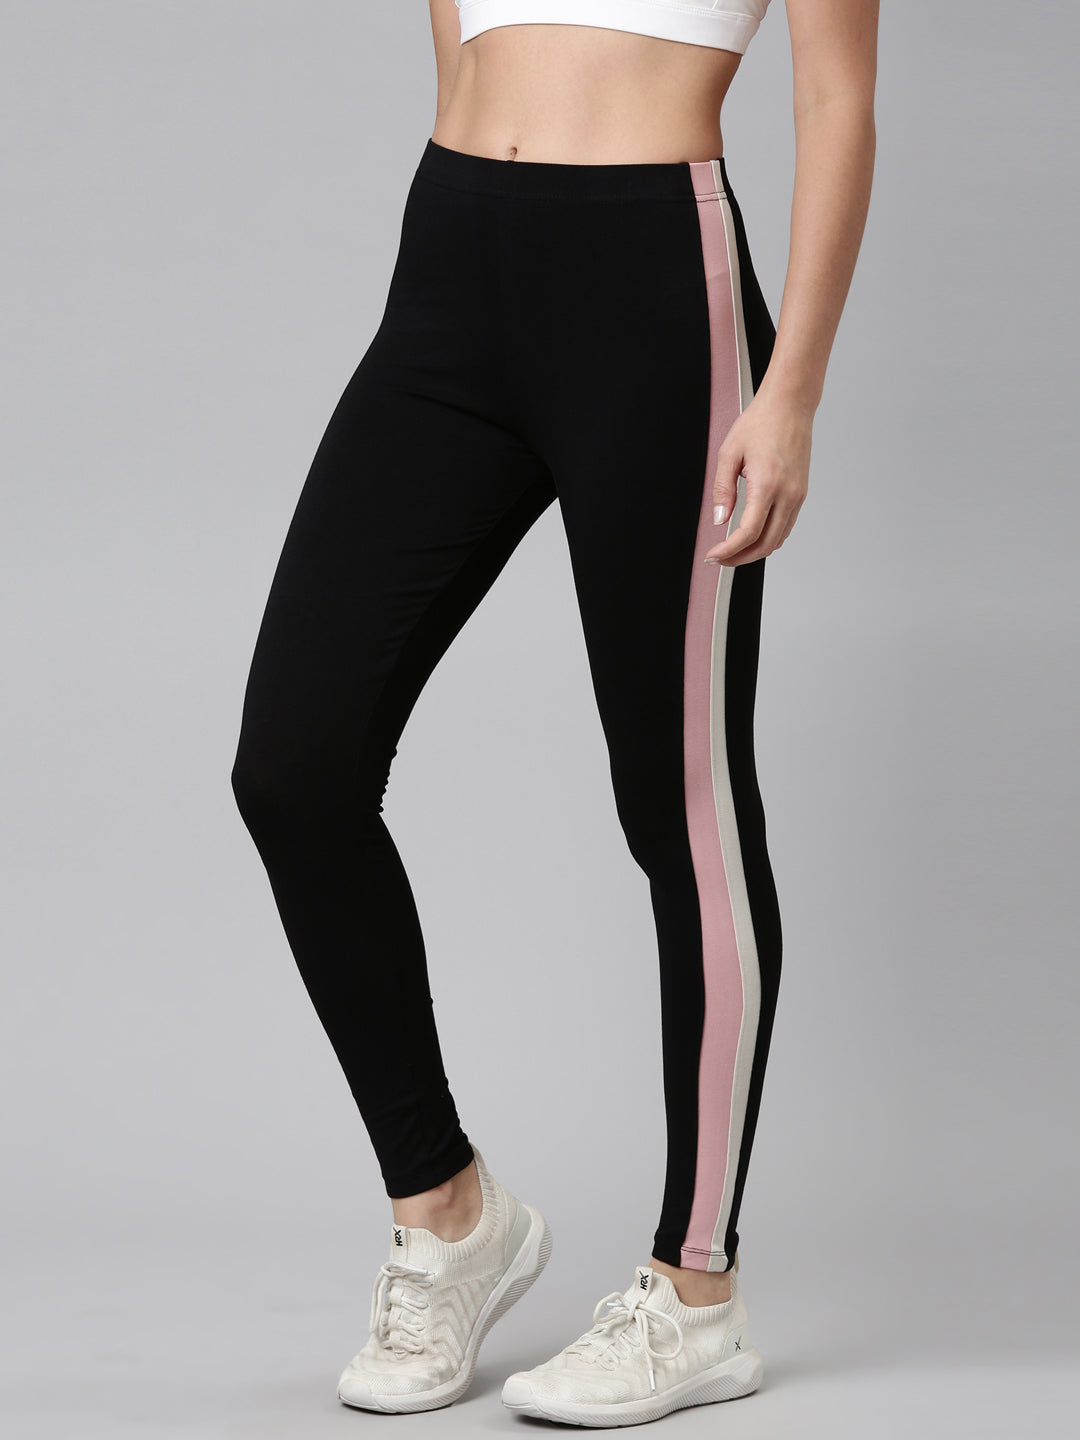 Two Stripe Legging – The HOUSE of AKD by Angela King Designs, Inc.